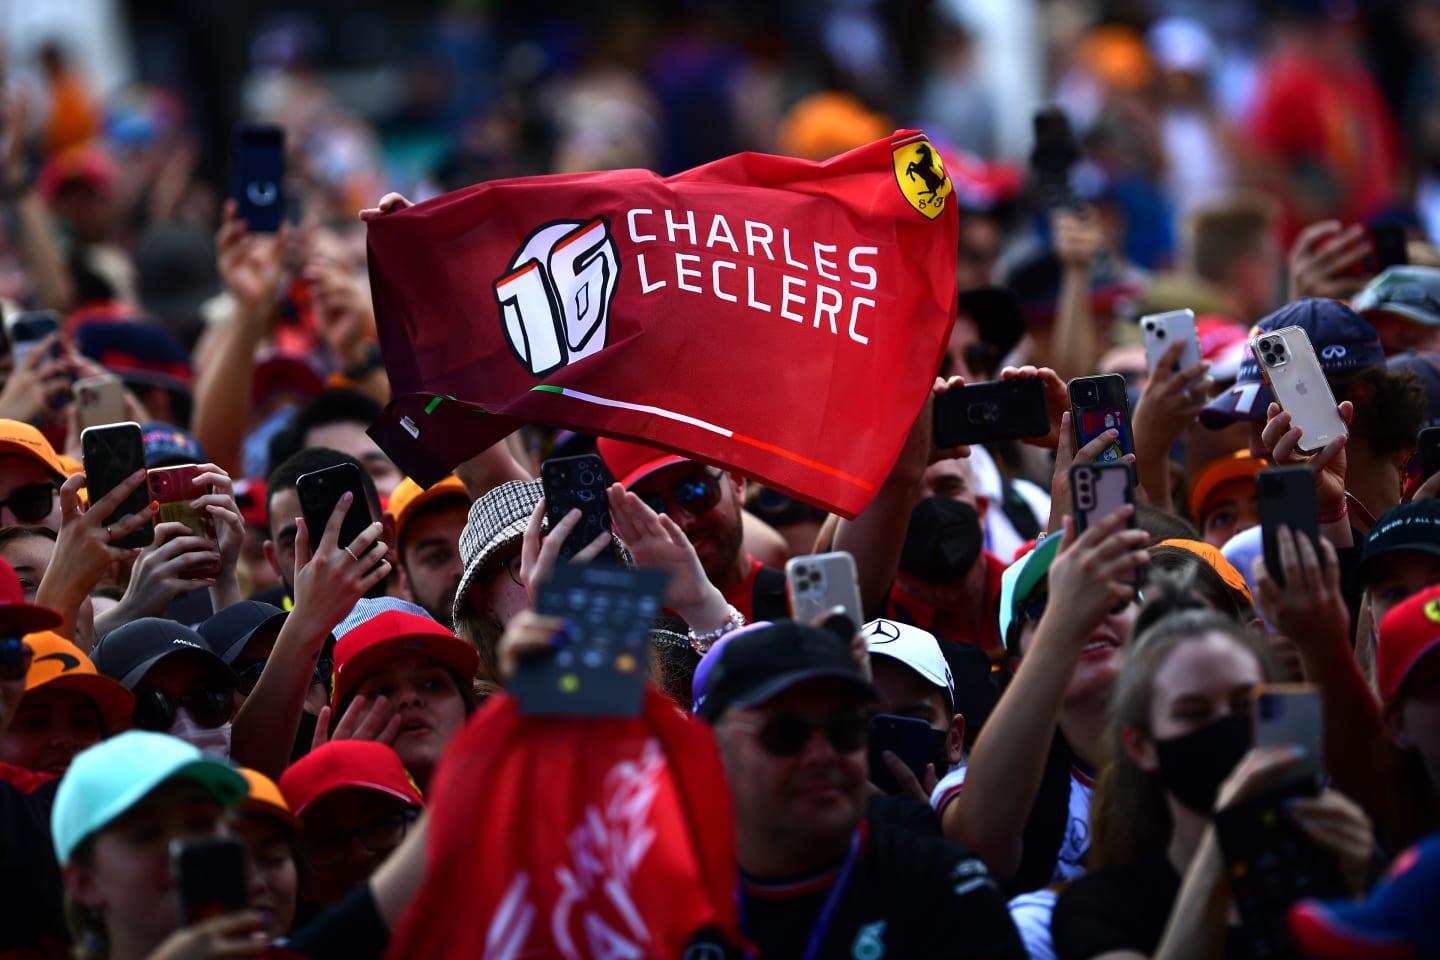 MELBOURNE, AUSTRALIA - APRIL 09: Charles Leclerc of Monaco and Ferrari fans hold a banner to show